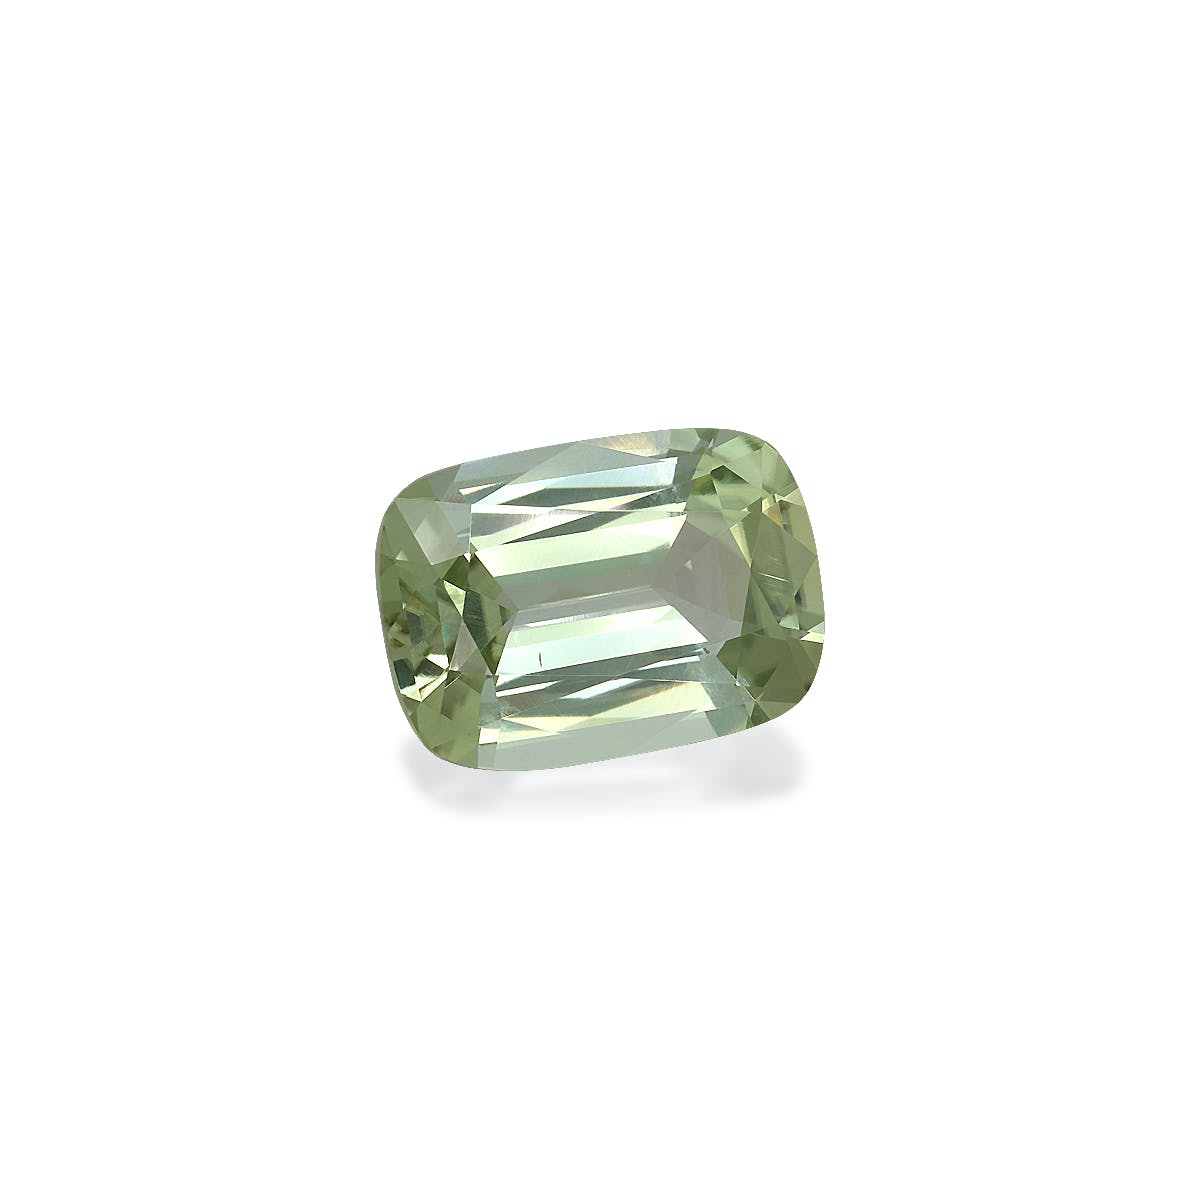 Picture of Mist Green Tourmaline 9.45ct (TG0454)